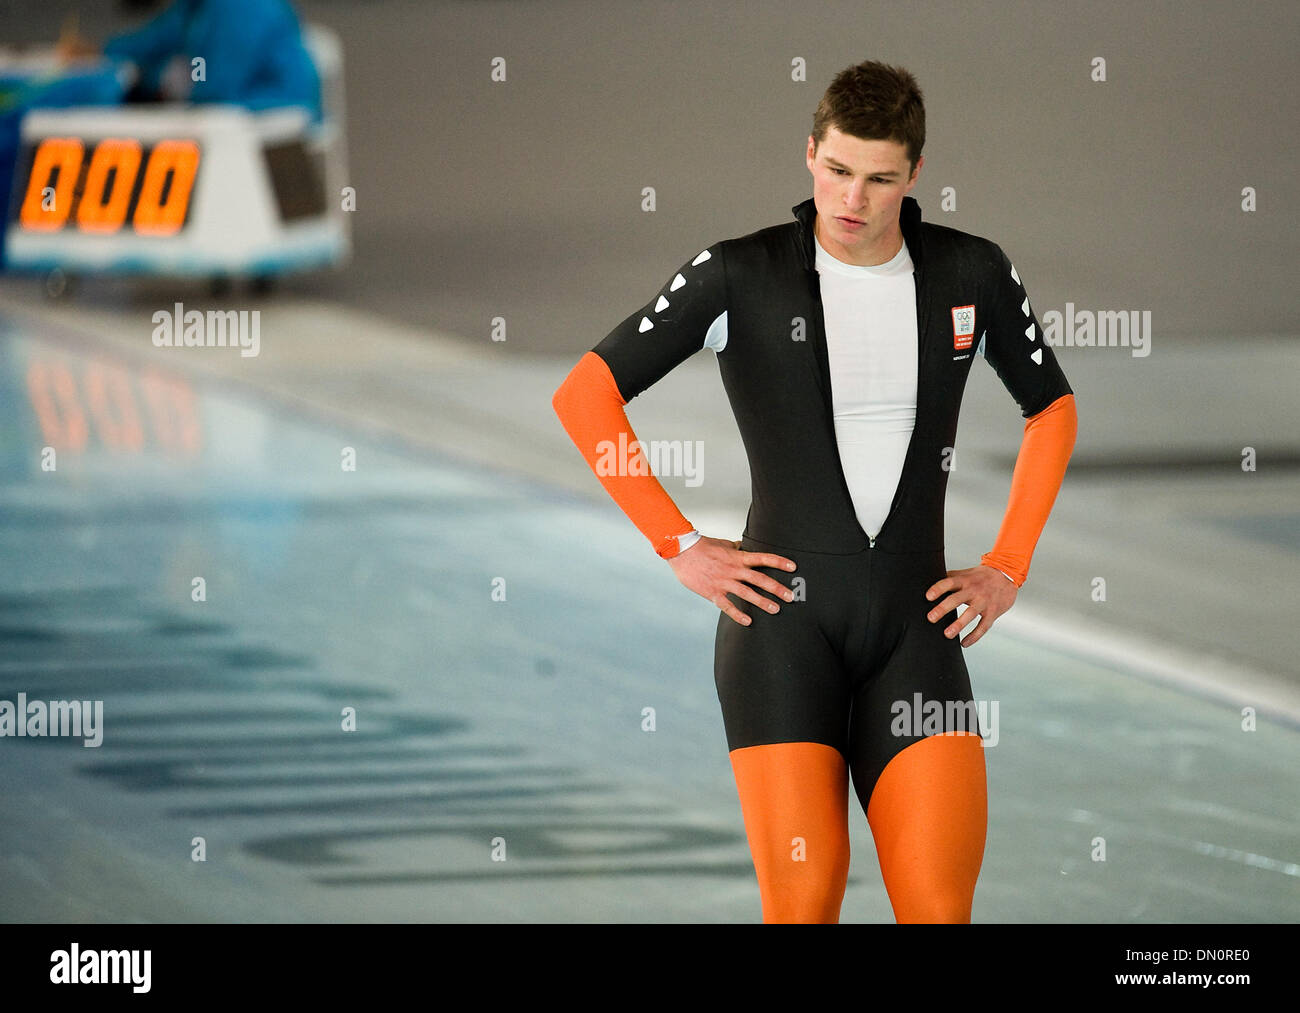 Feb. 23, 2010 - Vancouver, British Columbia, Canada - Olympics Men's 10000 M Speed Skating - Netherlands's Sven Kramer  who was a race favorite for a medal forgot to cross lanes and was disqualified in Men's 10000 M Speed Skating at the 2010 Winter Olympic on February 23, 2010 in Vancouver, British Columbia. (Credit Image: © Paul Kitagaki Jr./ZUMApress.com) Stock Photo